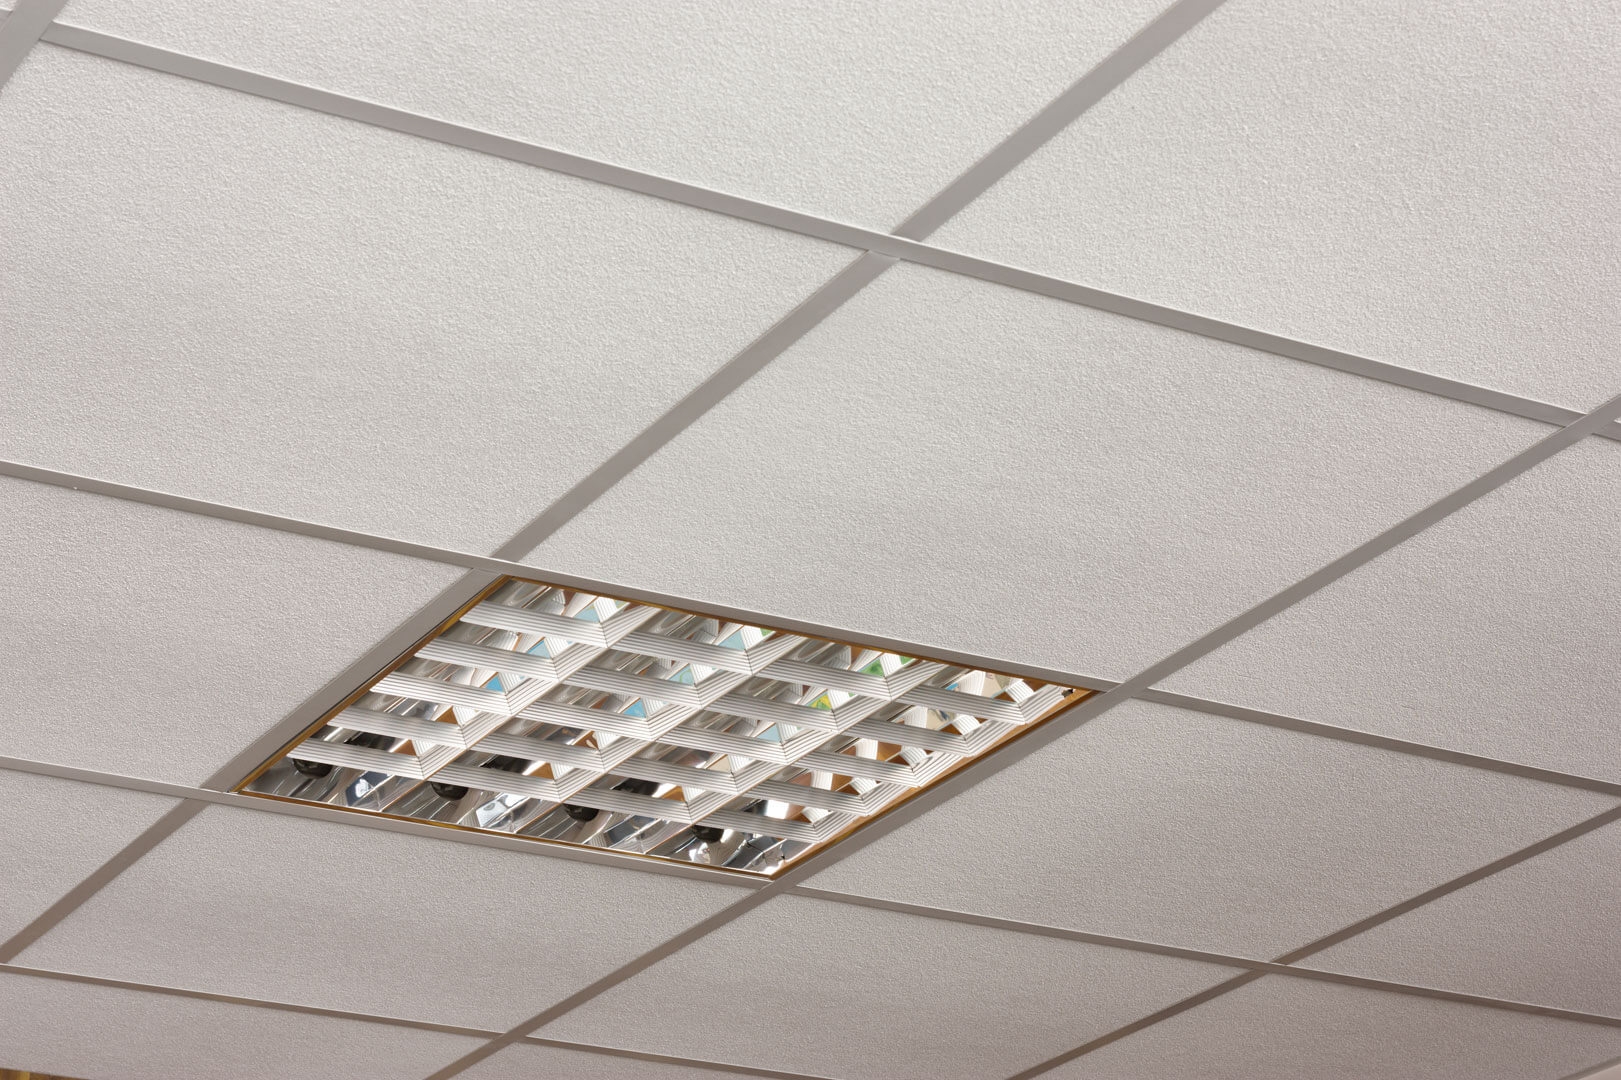 Tatra Suspended Ceiling Tilesceiling tiles lights accessories a leading uk supplier of